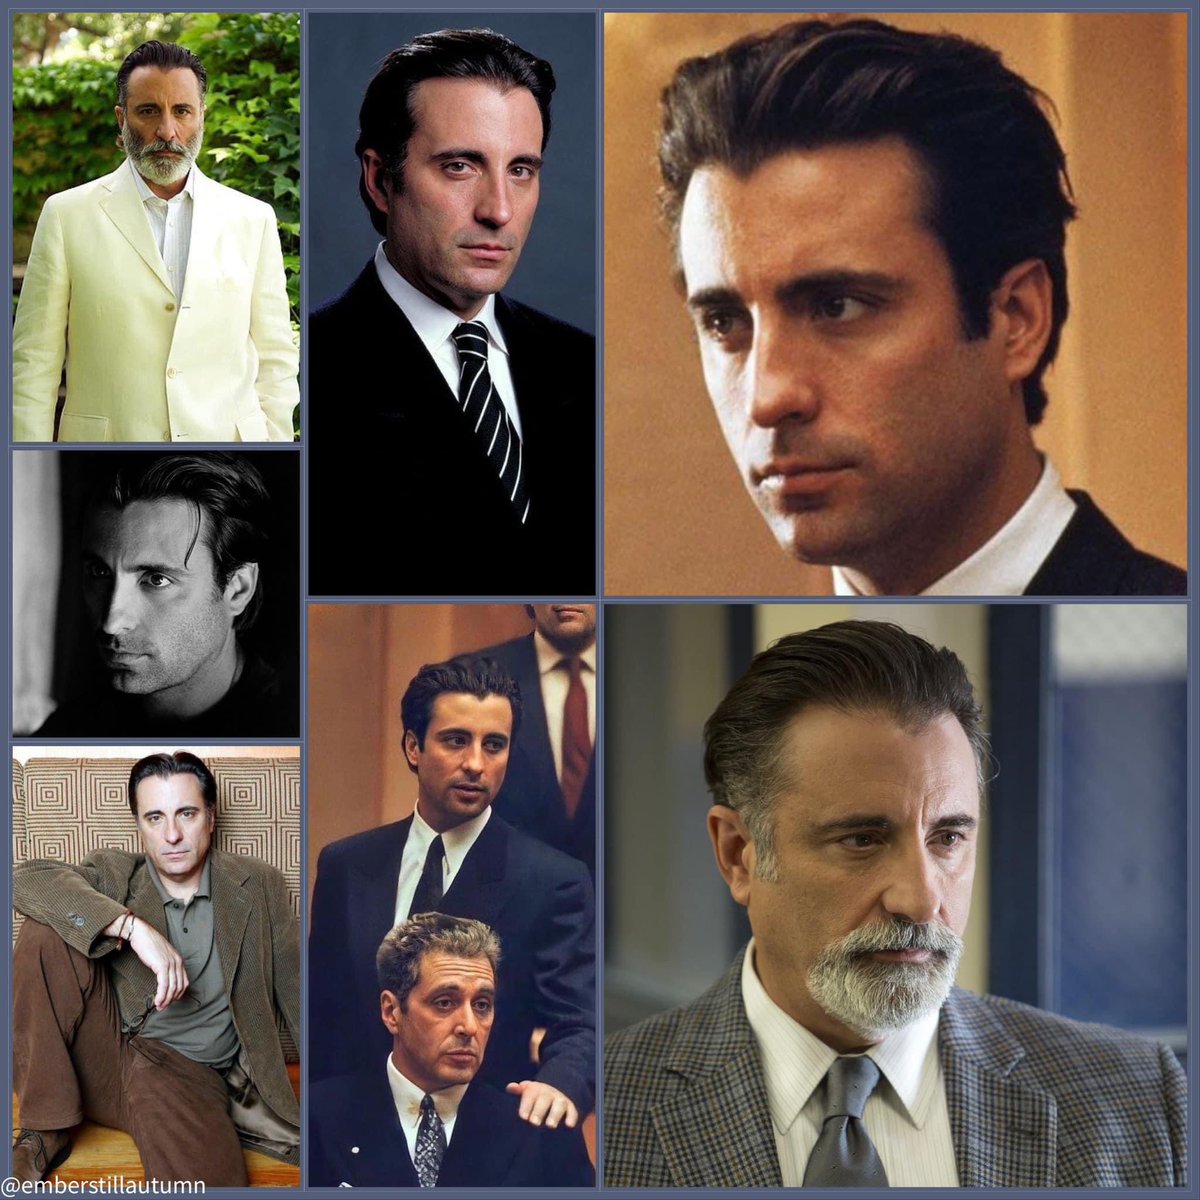 On this day back in 1956, this future actor was born..

Happy Birthday to Andy Garcia!

“You are defined by who you are, by your choices in life, in all regards, not just in doing movies.”

#andygarcia #theuntouchables #thegodfather